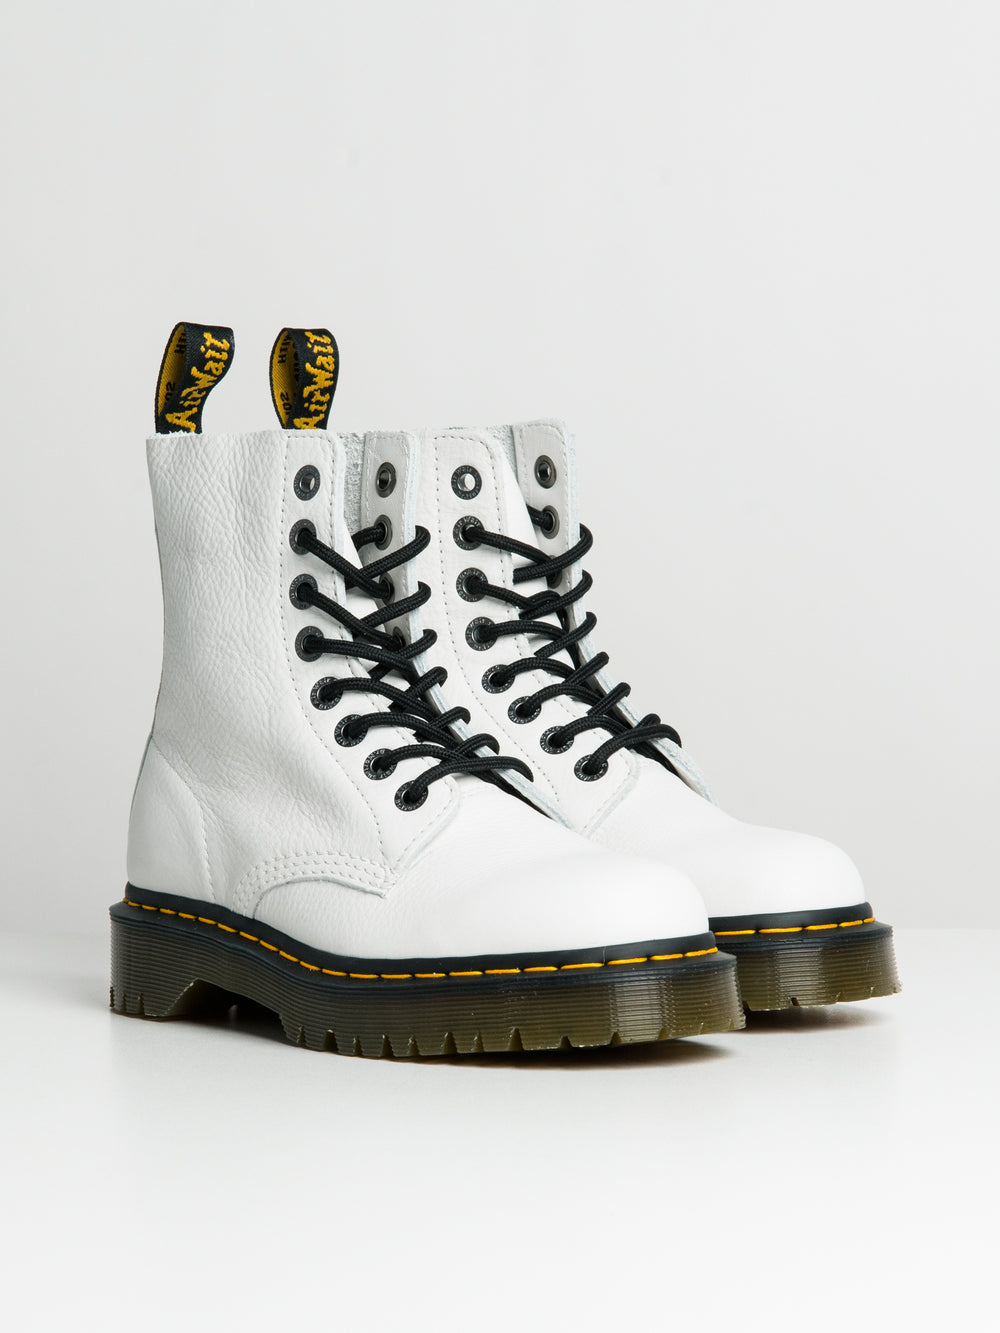 WOMENS DR MARTENS 1460 PASCAL BEX LACE UP BOOTS - CLEARANCE